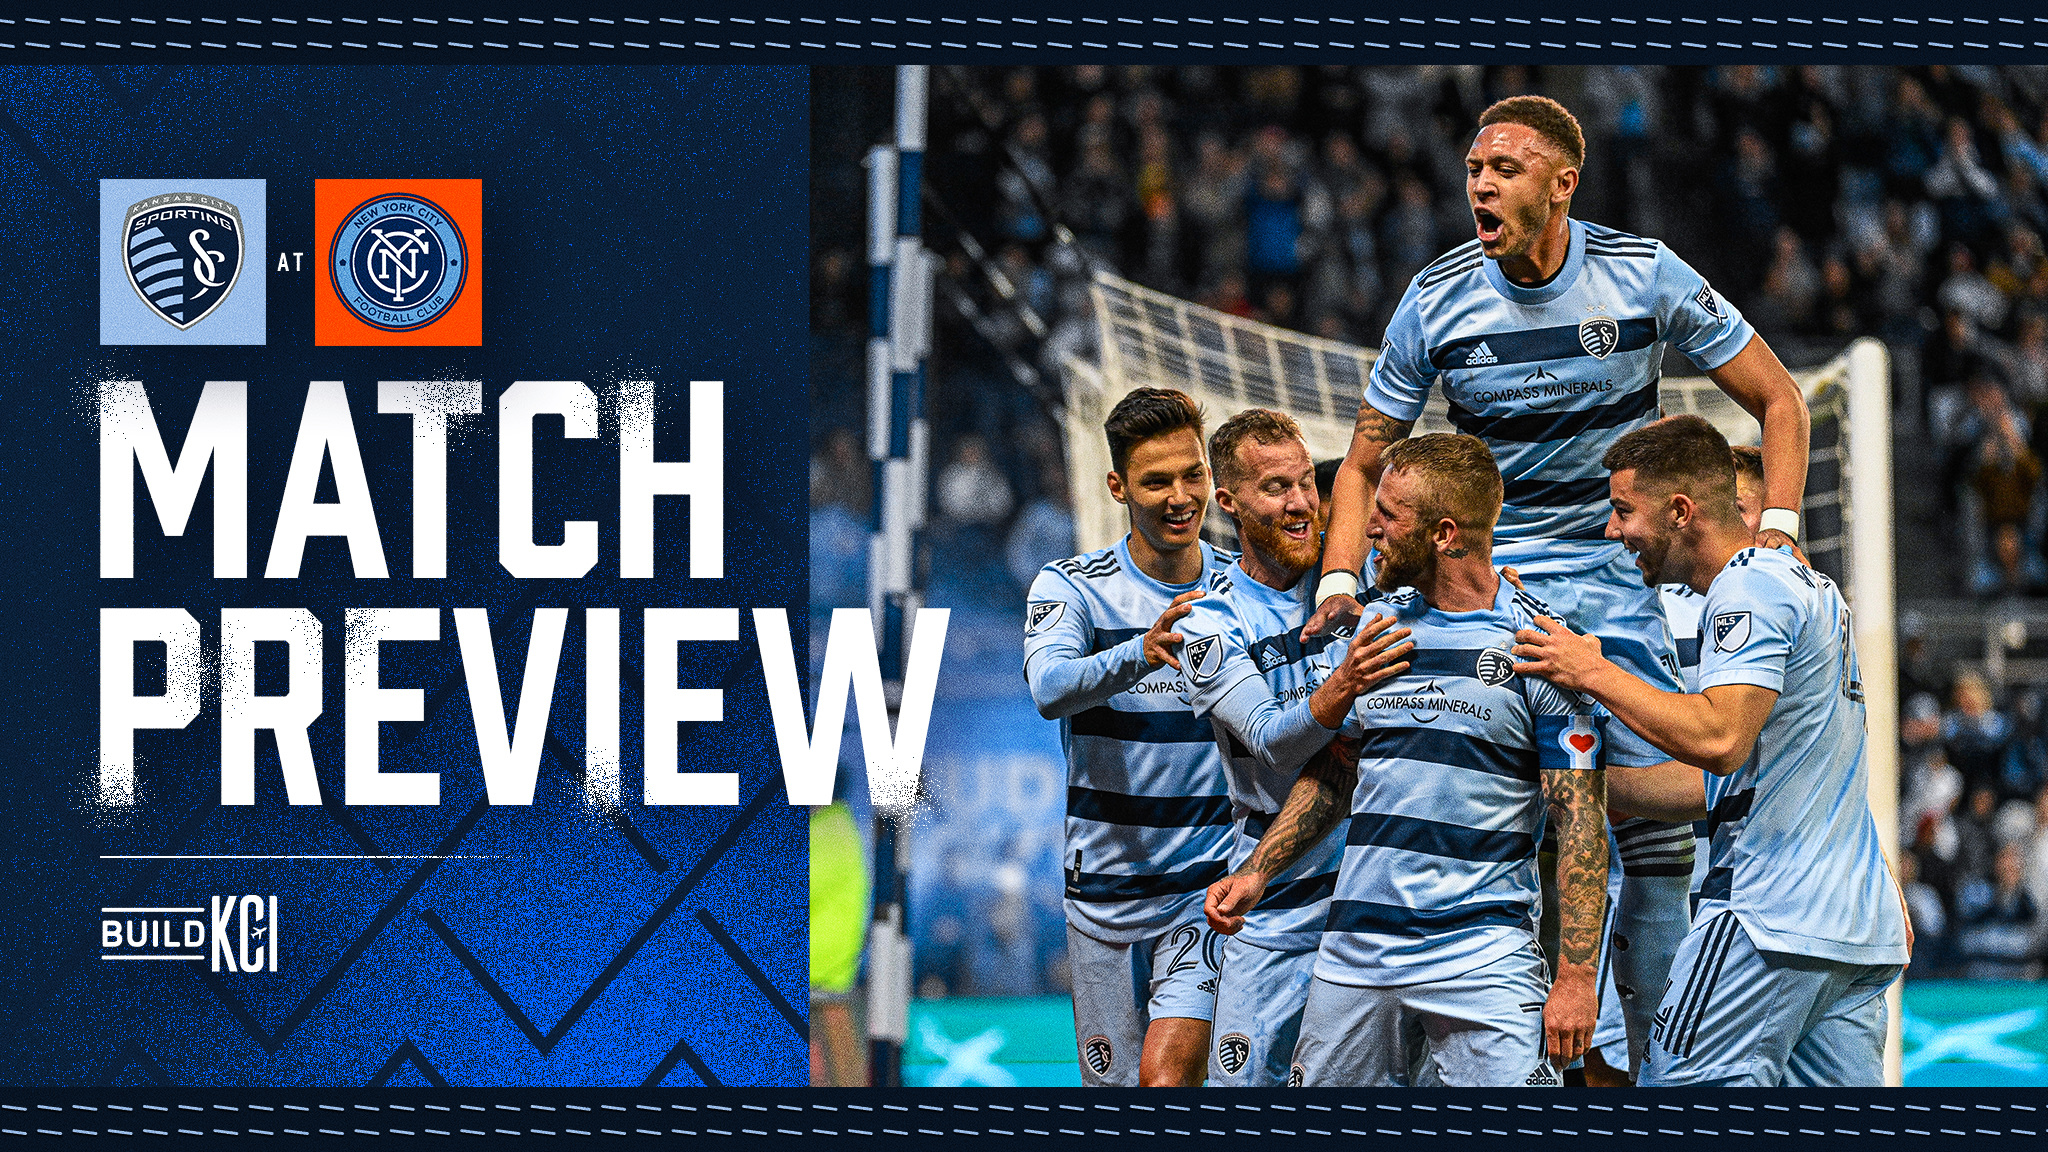 Build KCI Match Preview: Sporting KC faces MLS champions NYCFC on Saturday